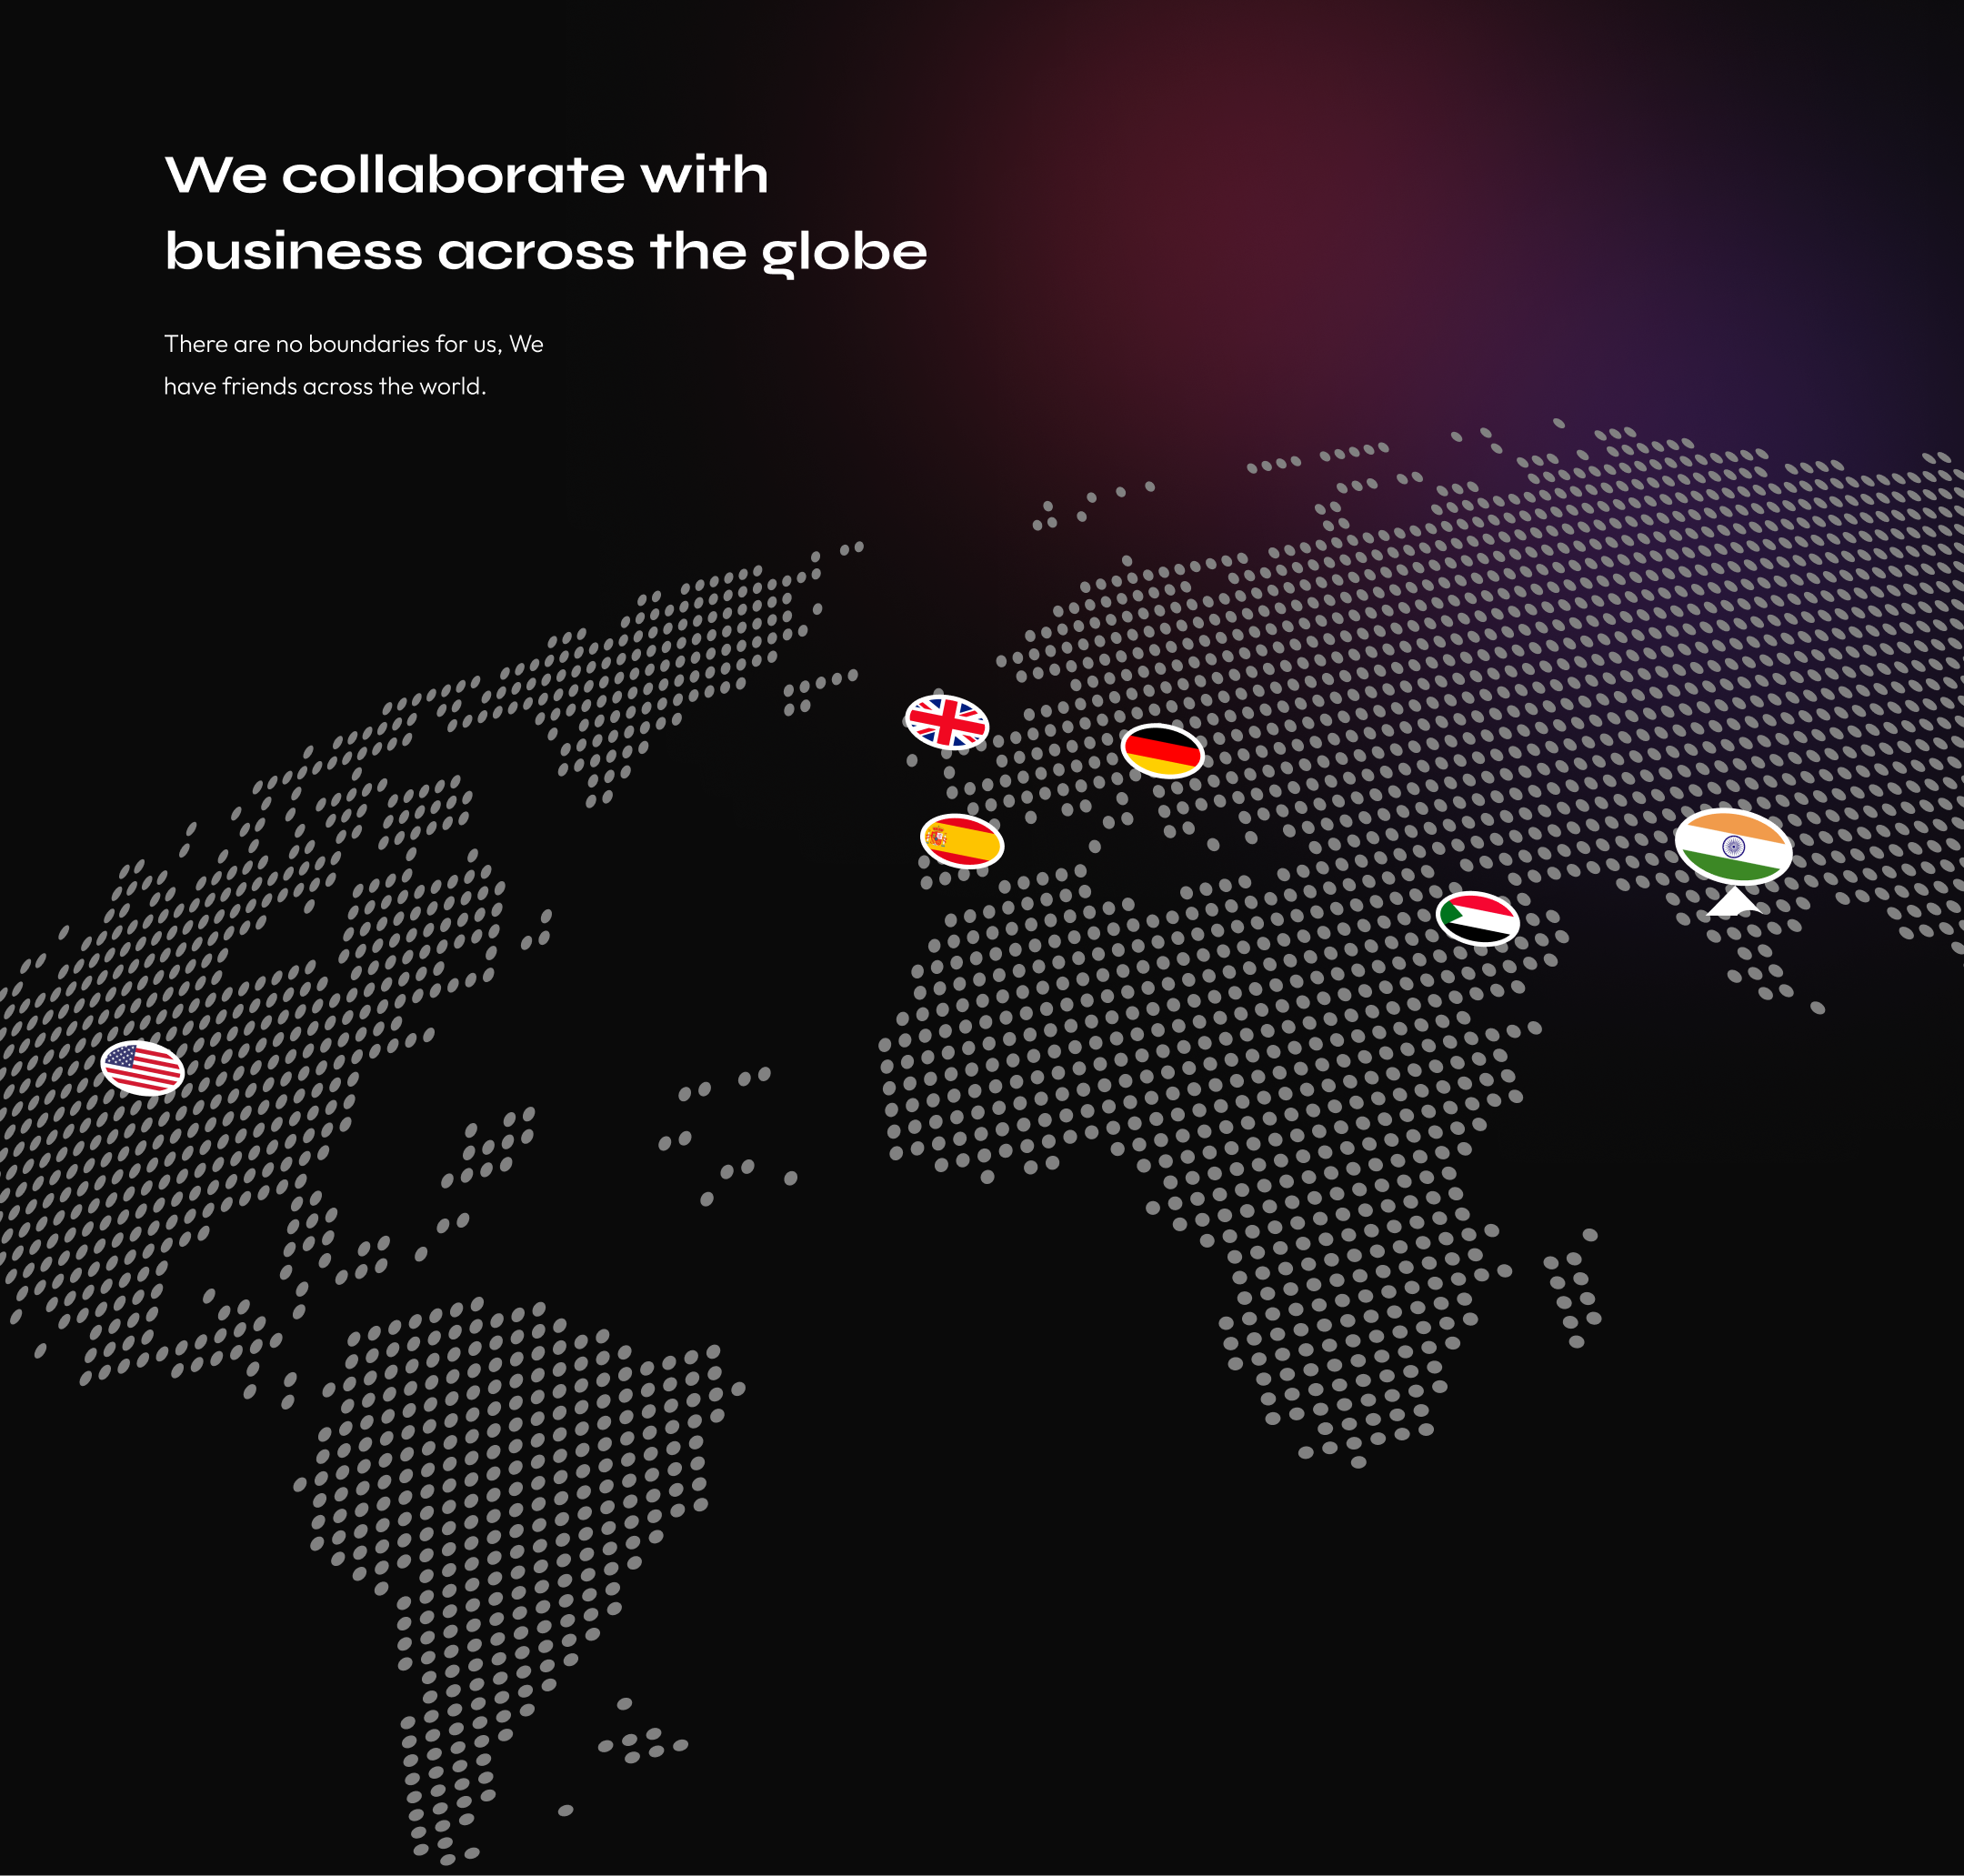 Studiolama services across the world